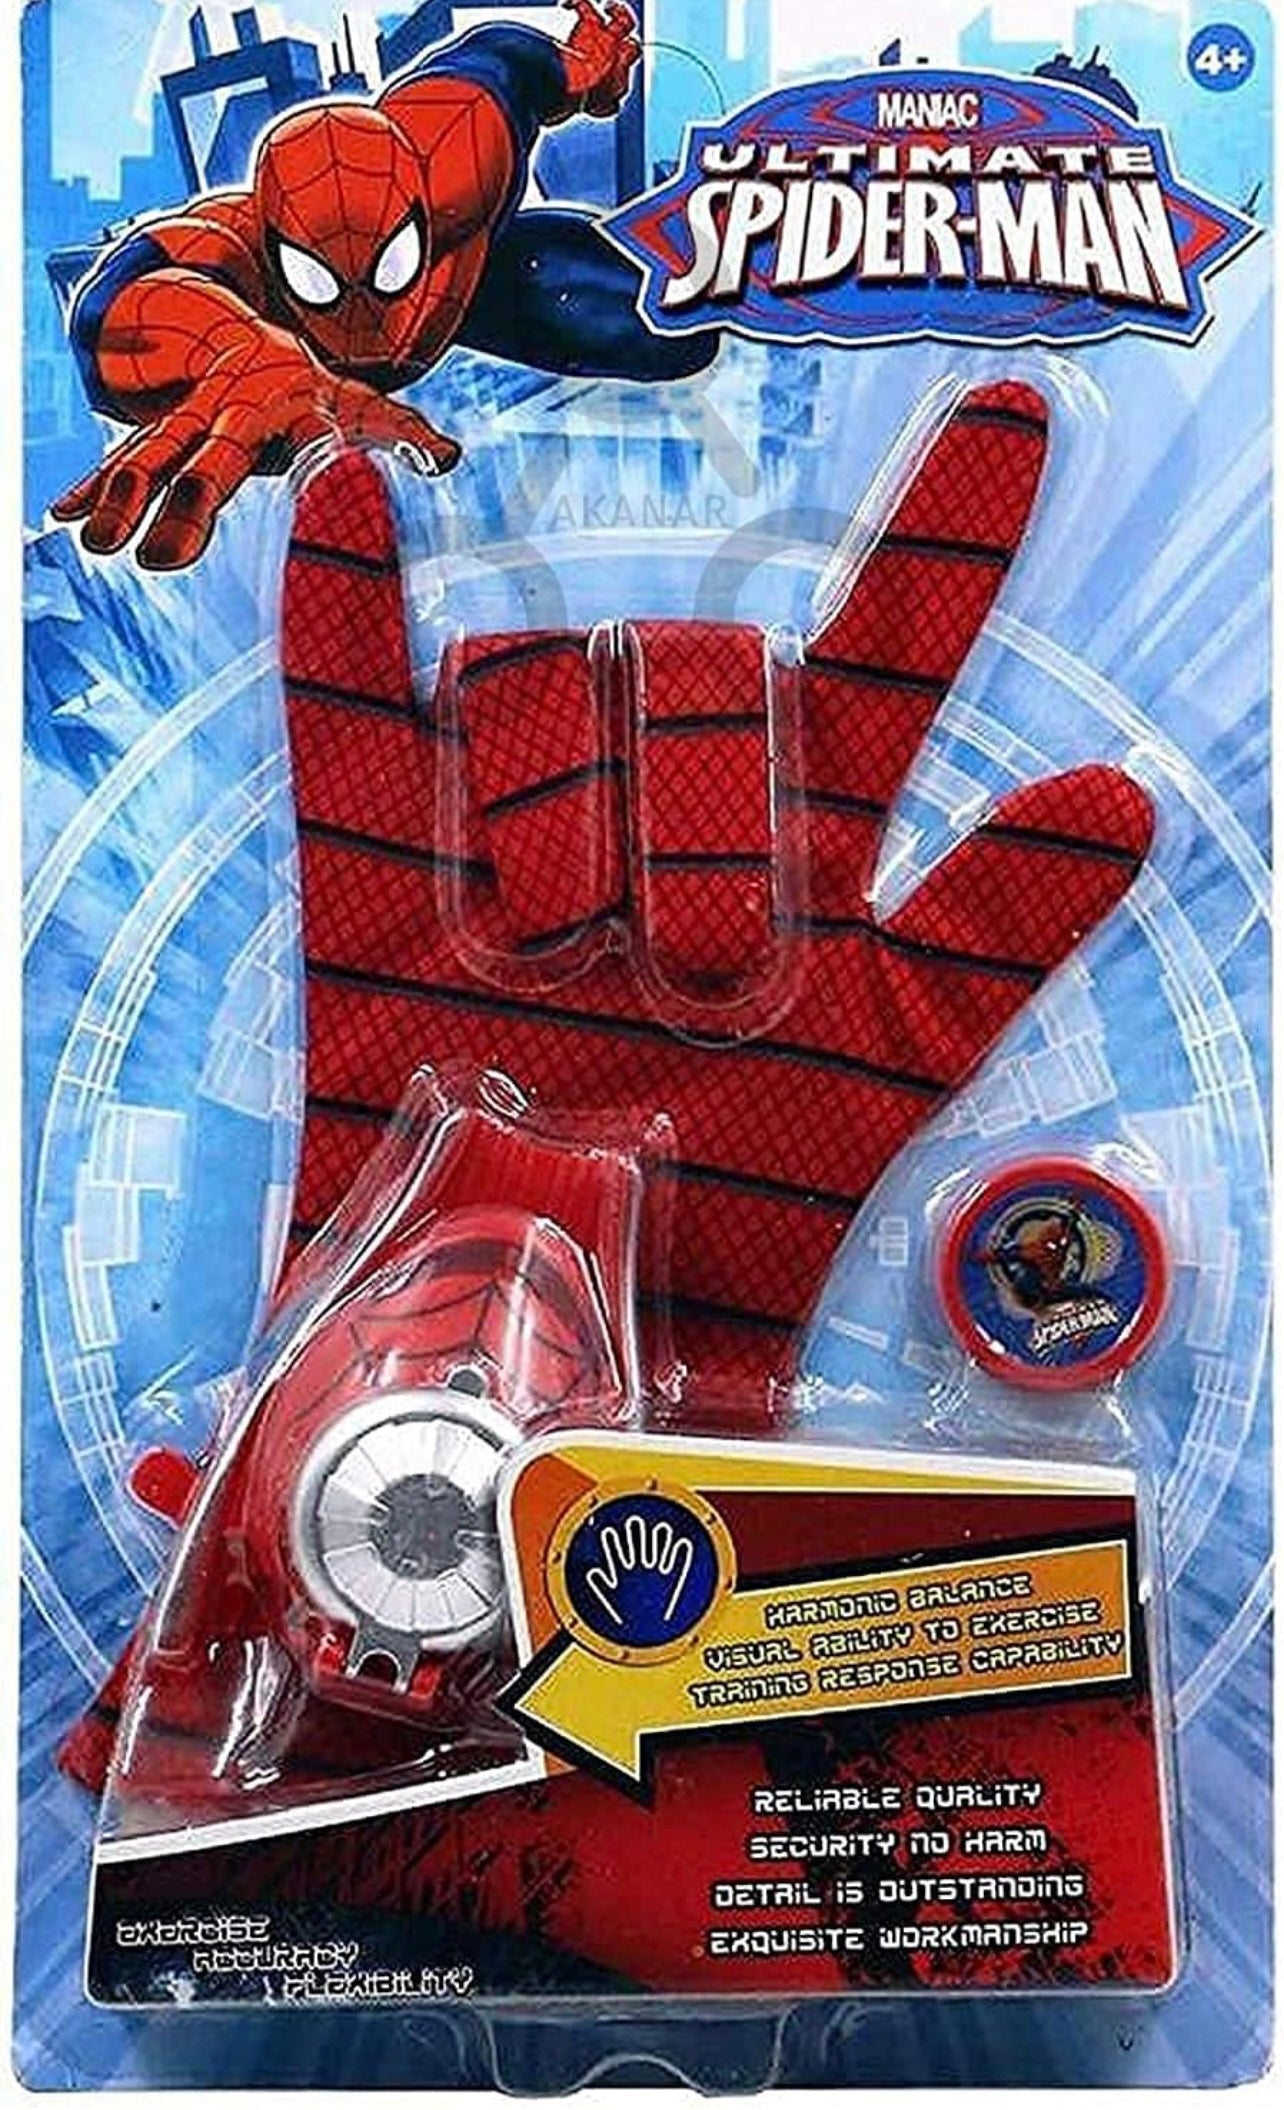 Spiderman Disc Shooter